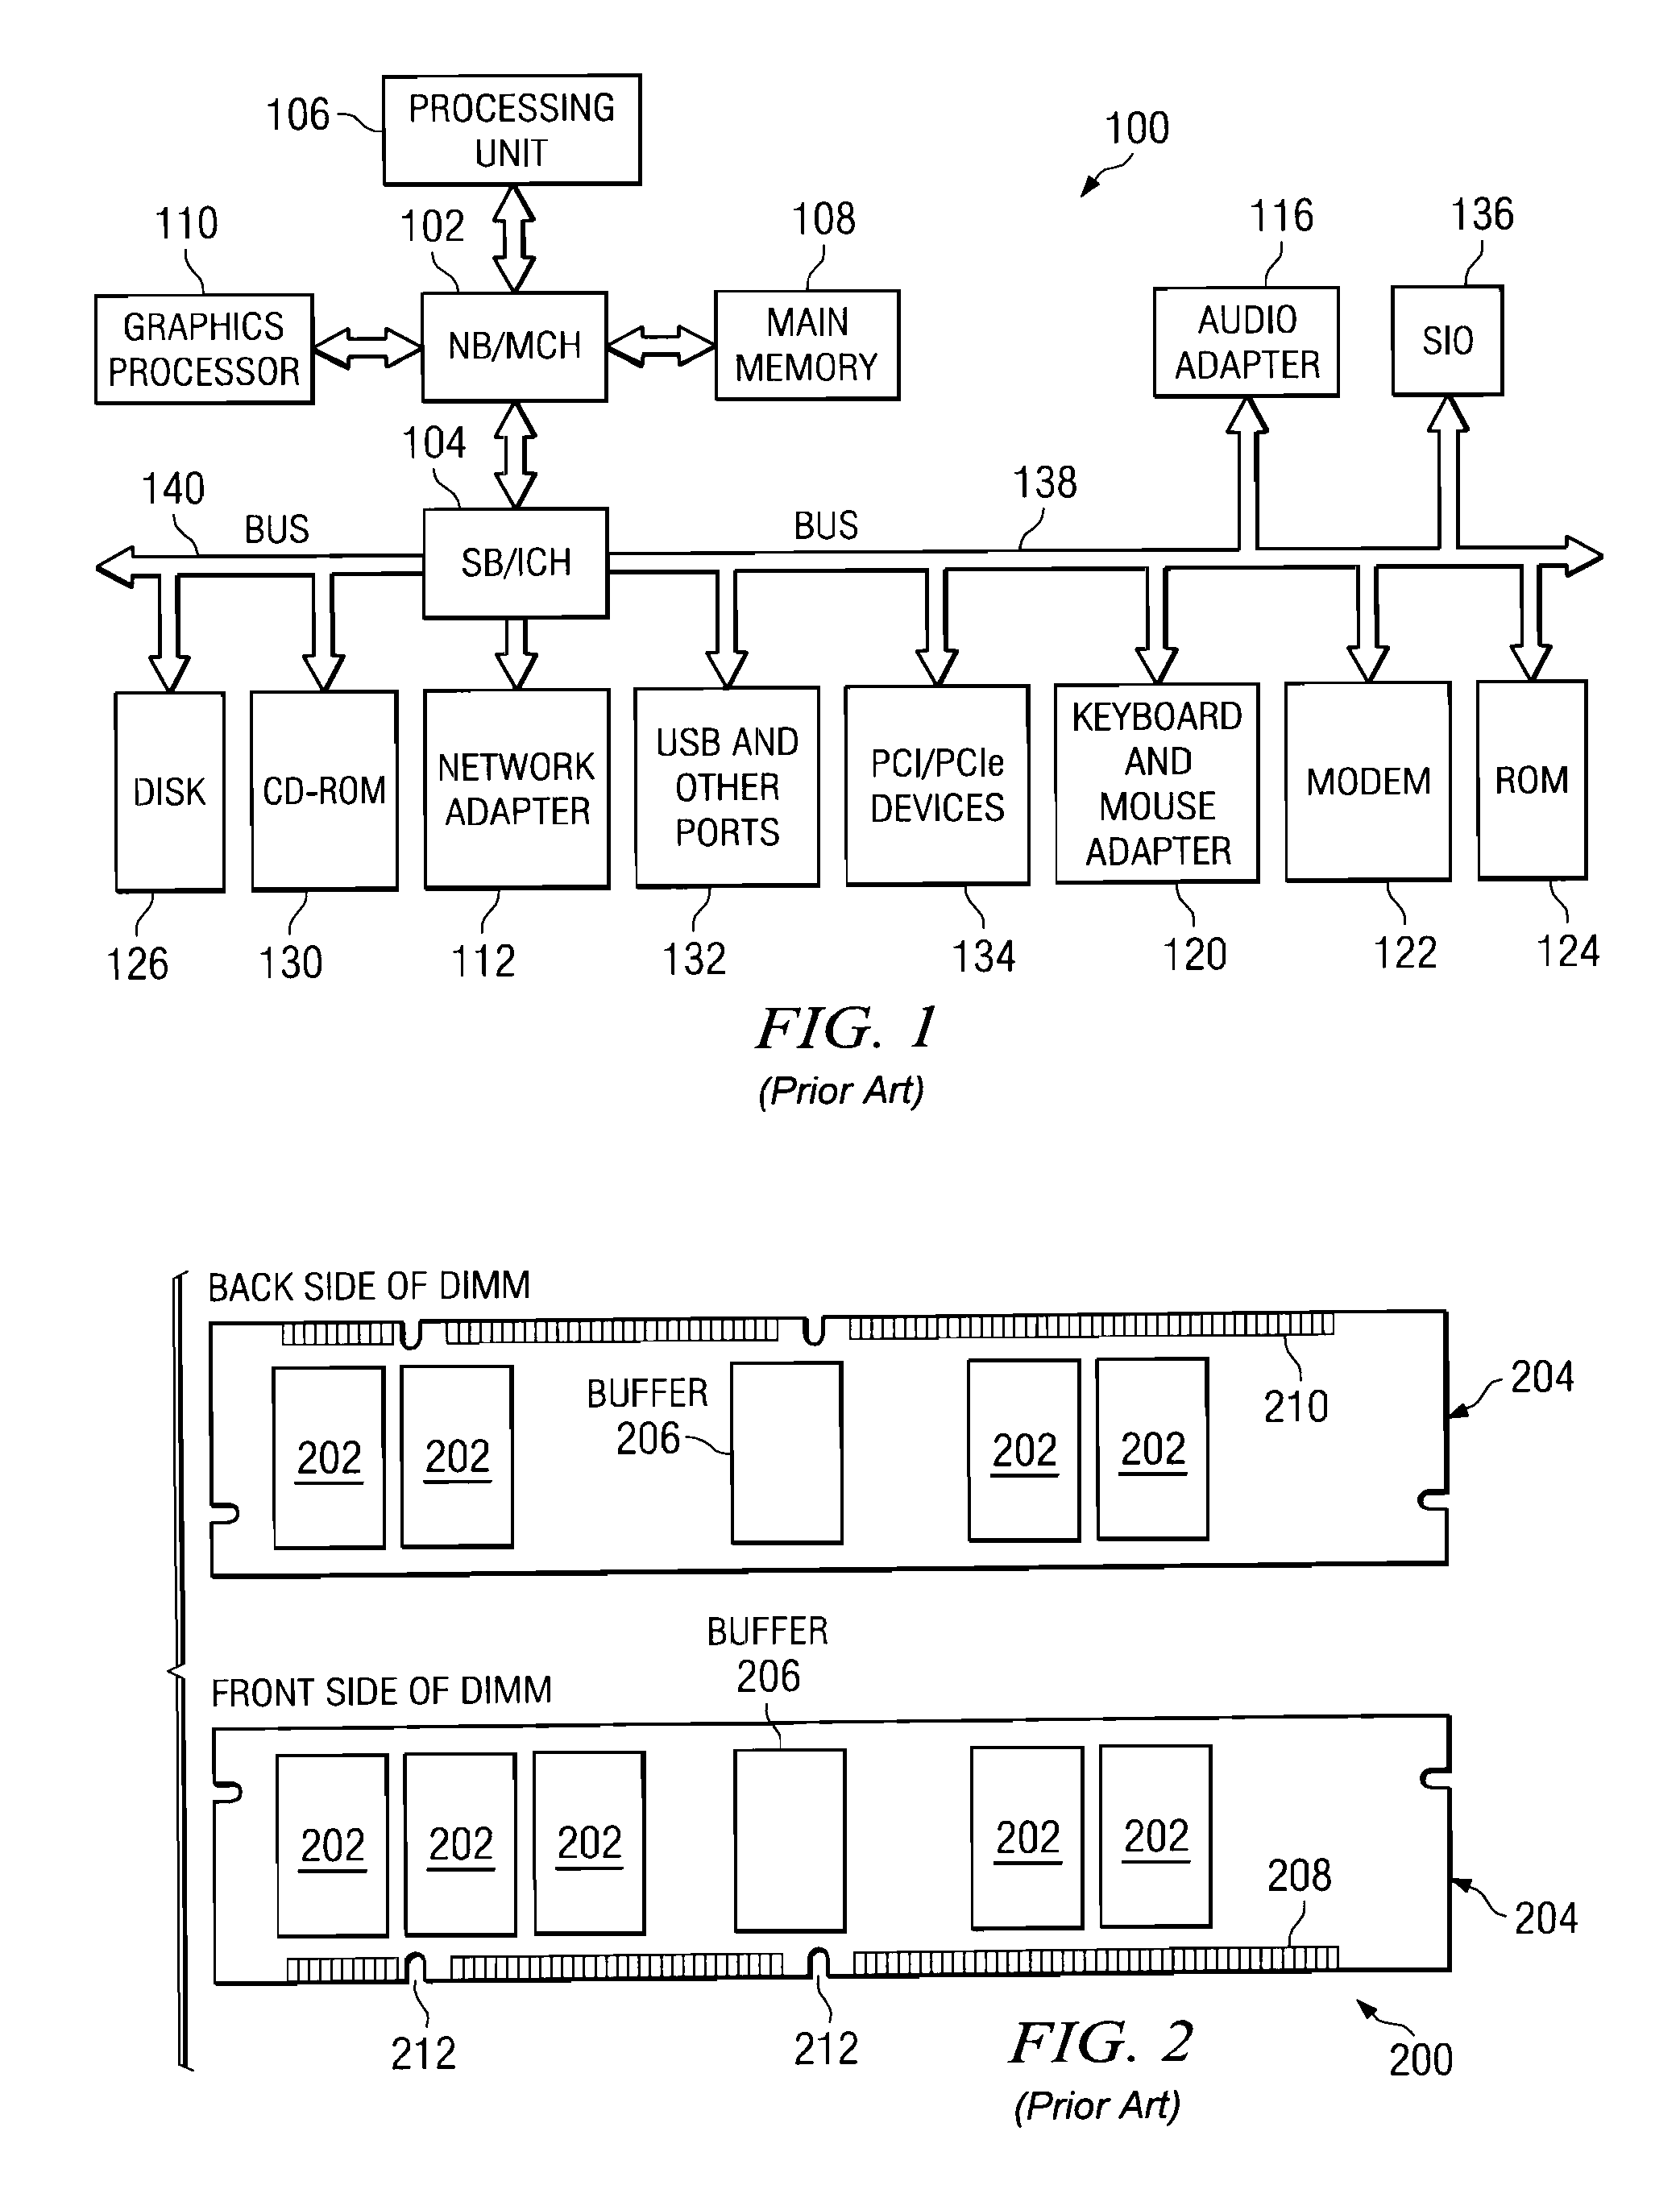 System to enable a memory hub device to manage thermal conditions at a memory device level transparent to a memory controller